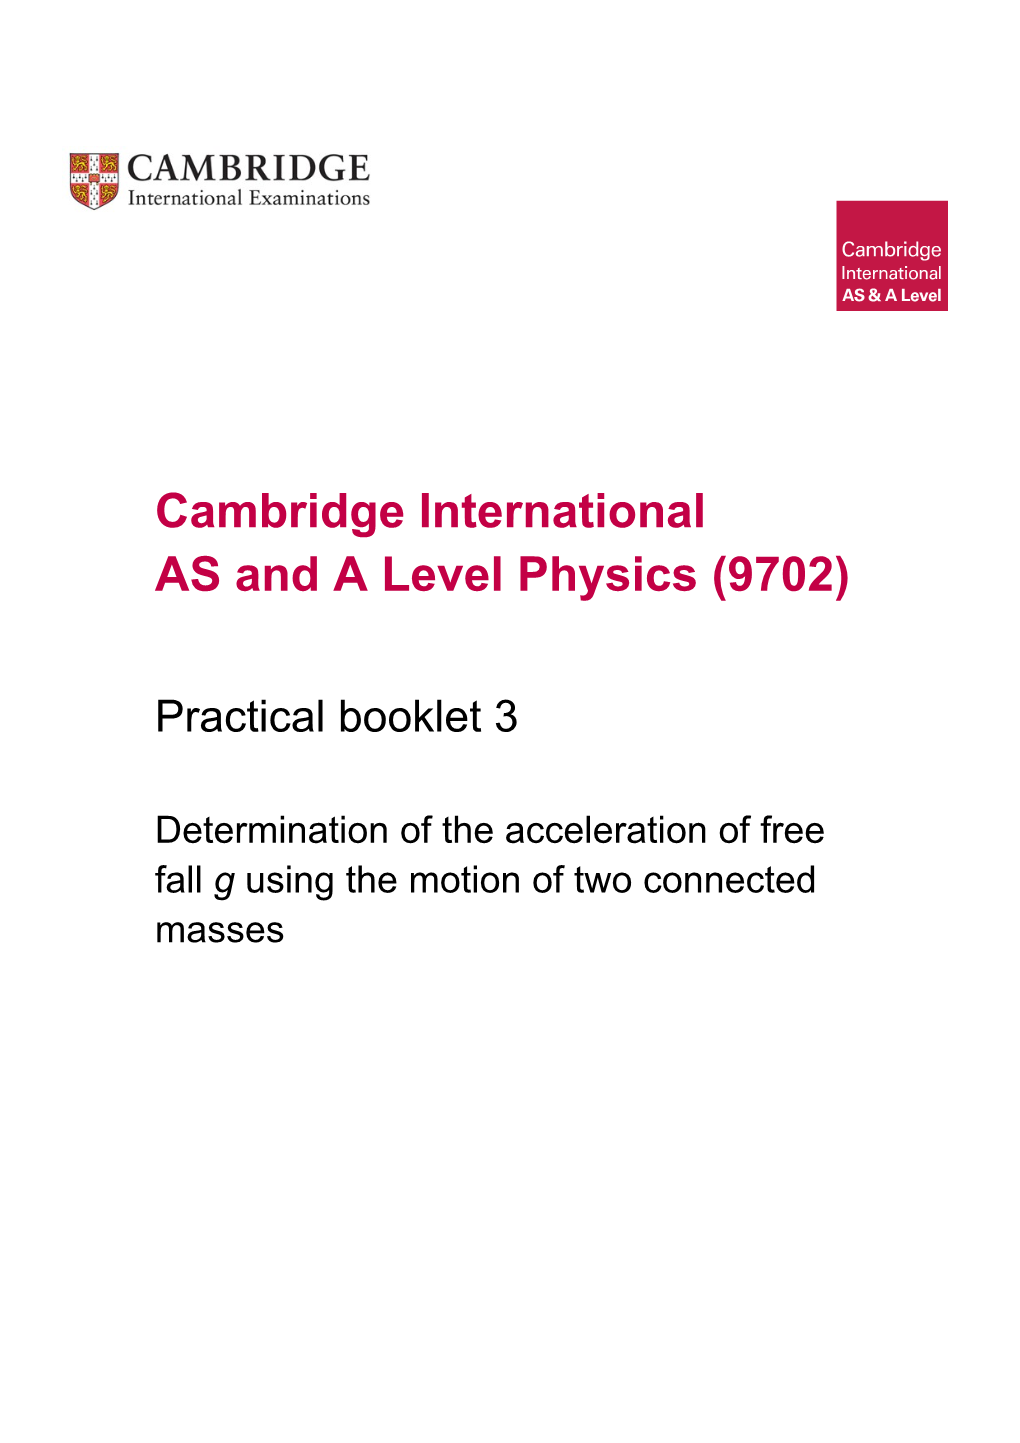 AS and a Levelphysics (9702)